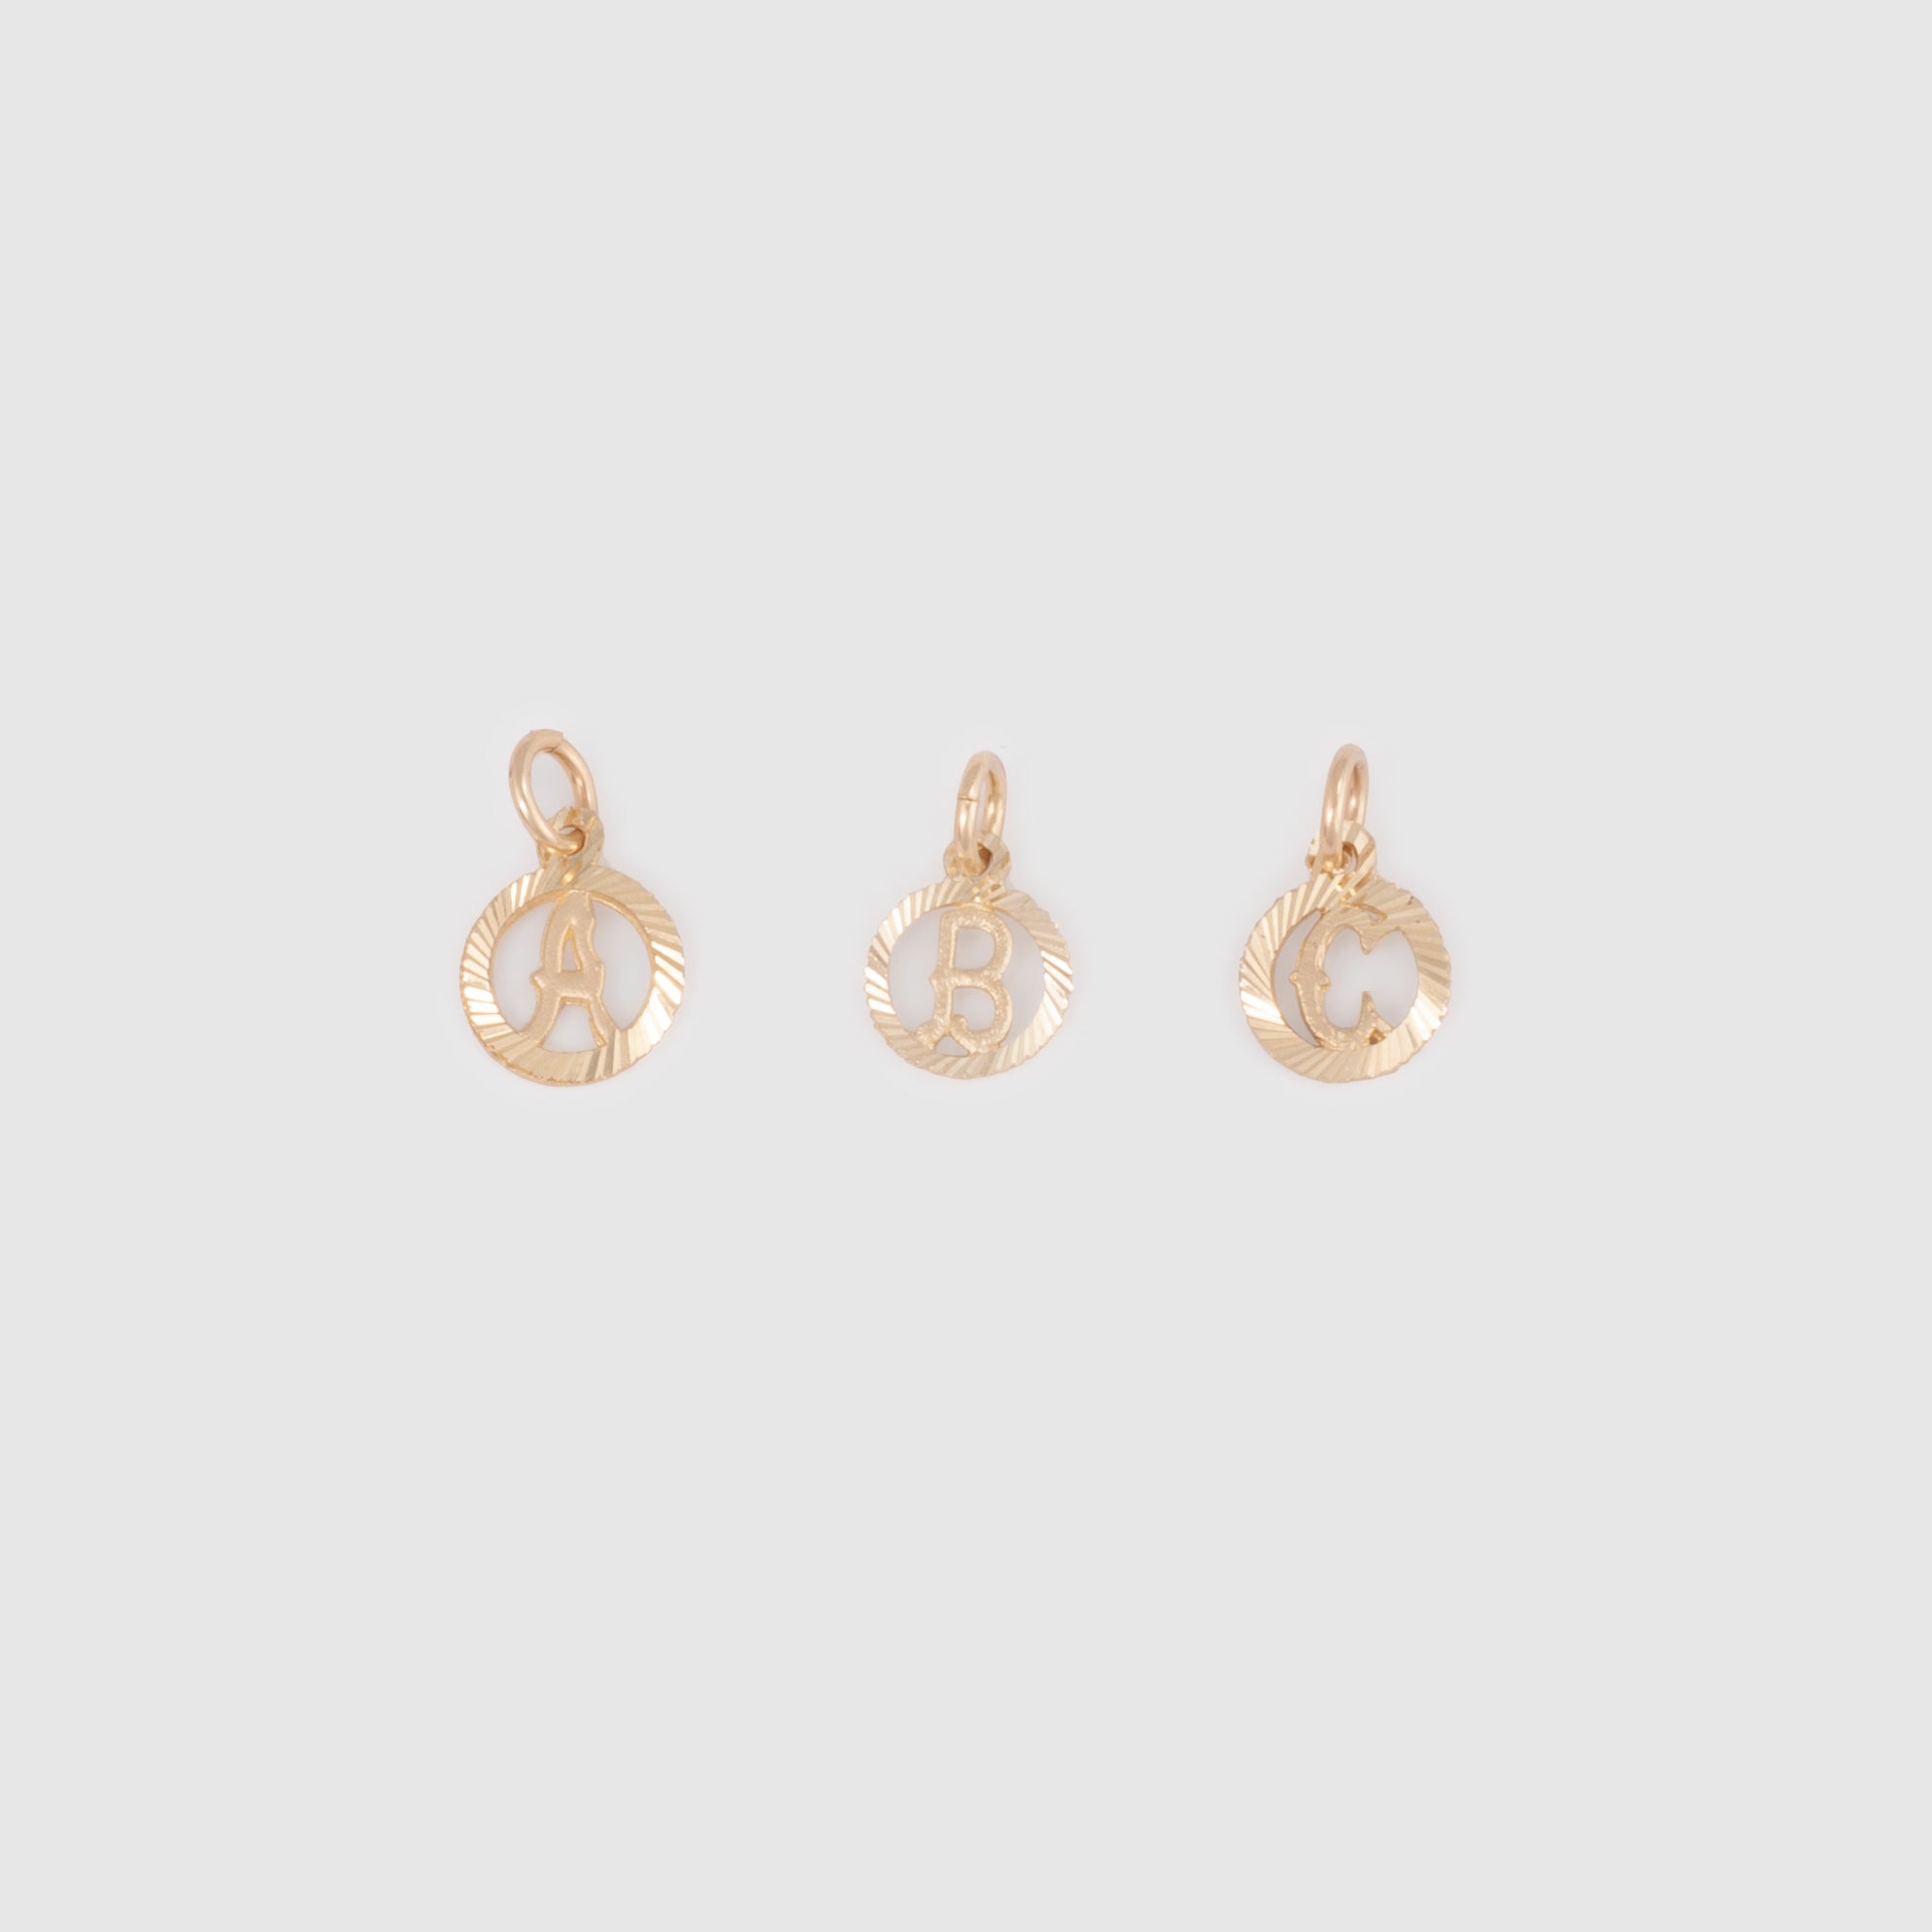 10k solid yellow gold circle initial charms in A, B, and C